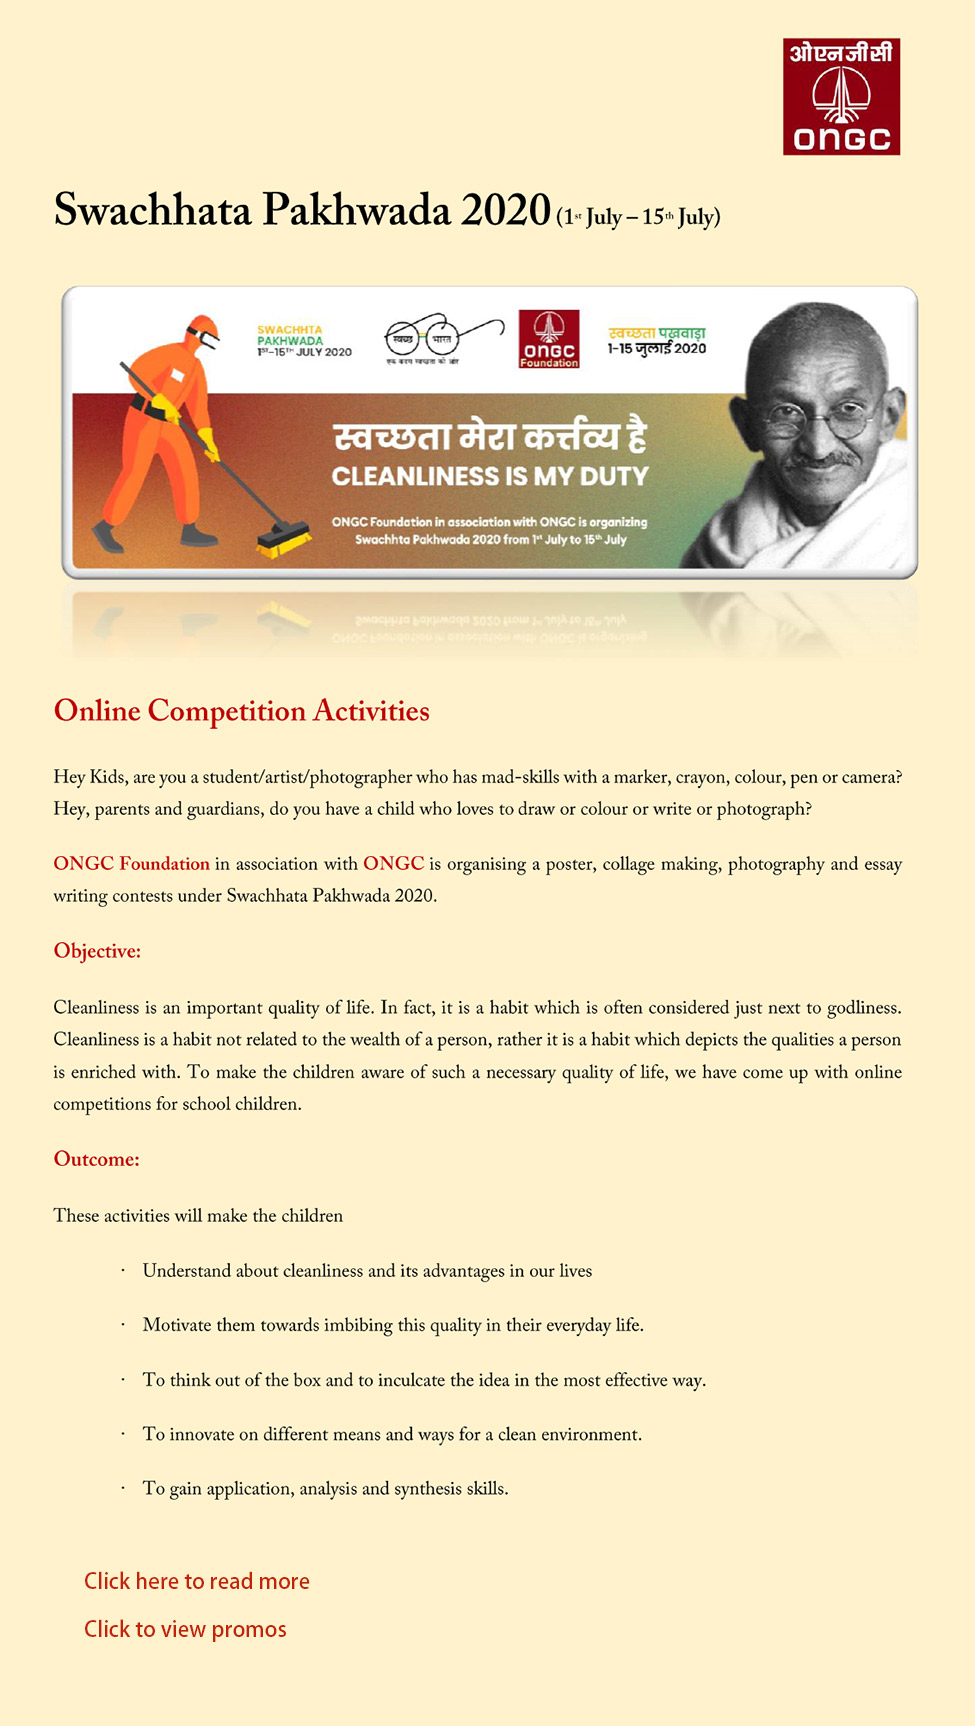 Online Competitions Guidelines